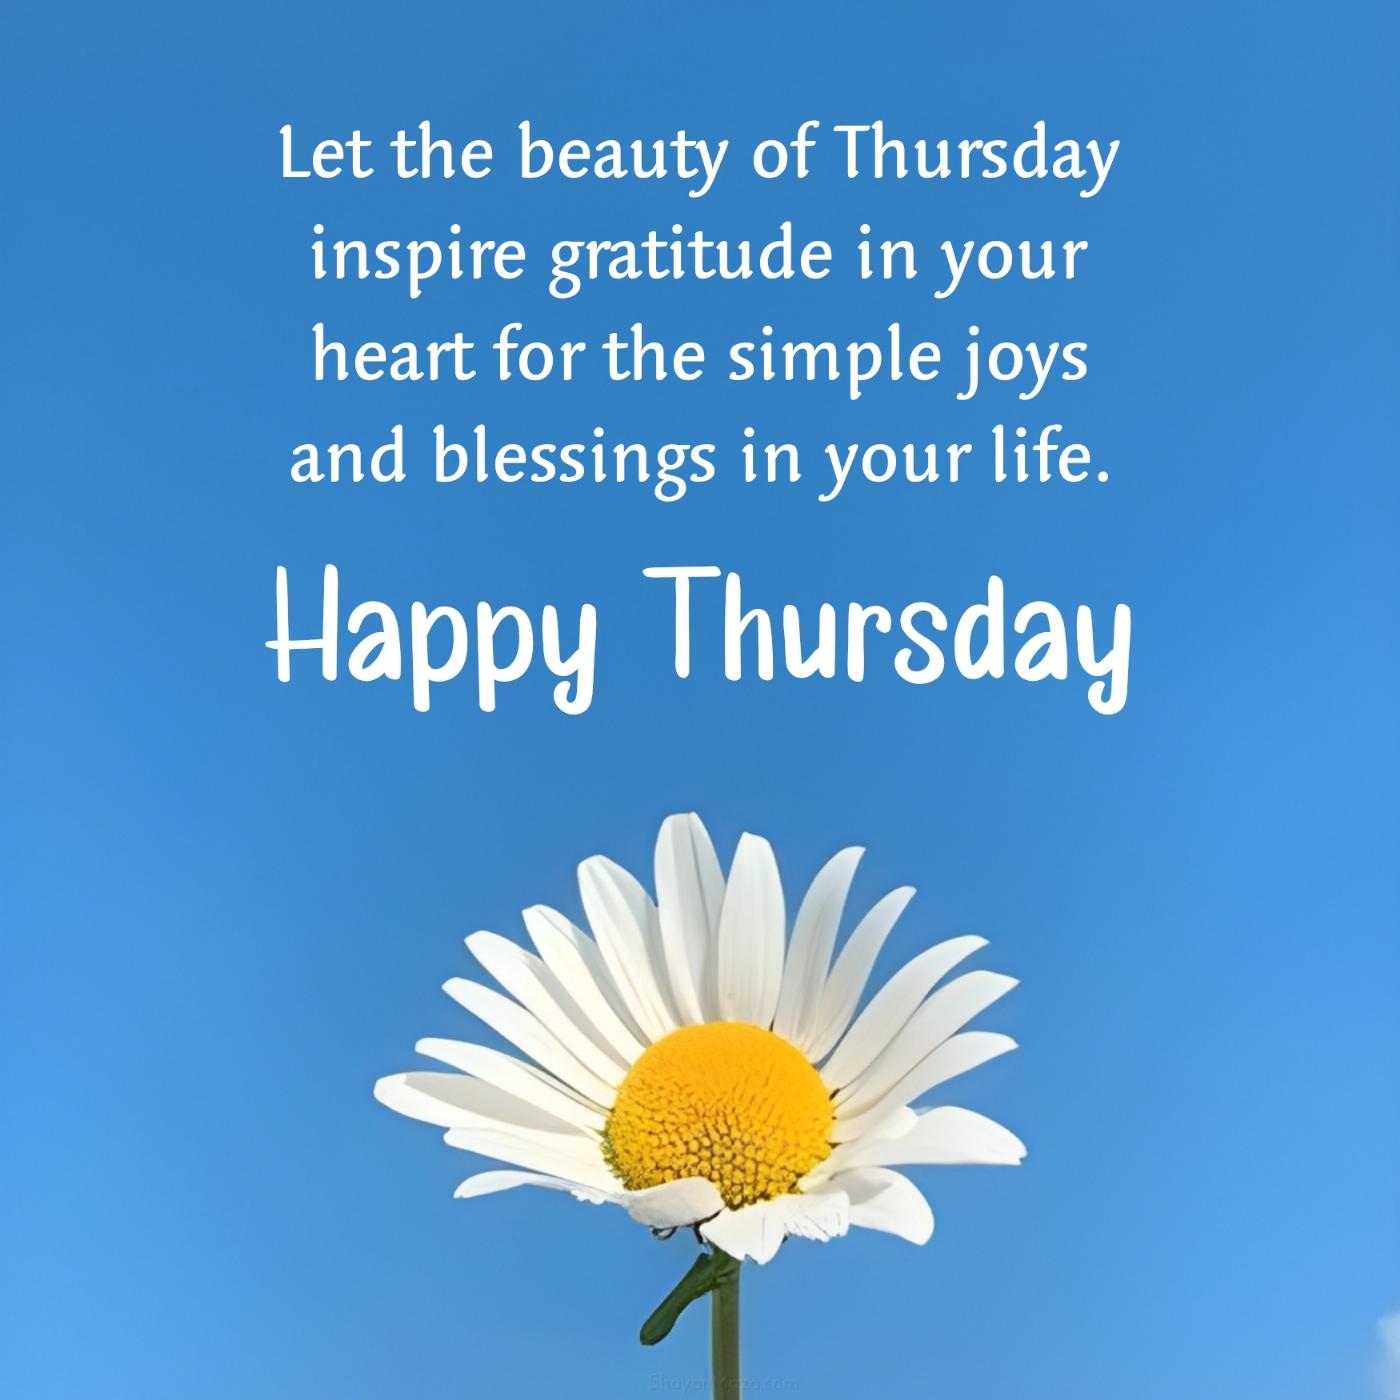 Let the beauty of Thursday inspire gratitude in your heart